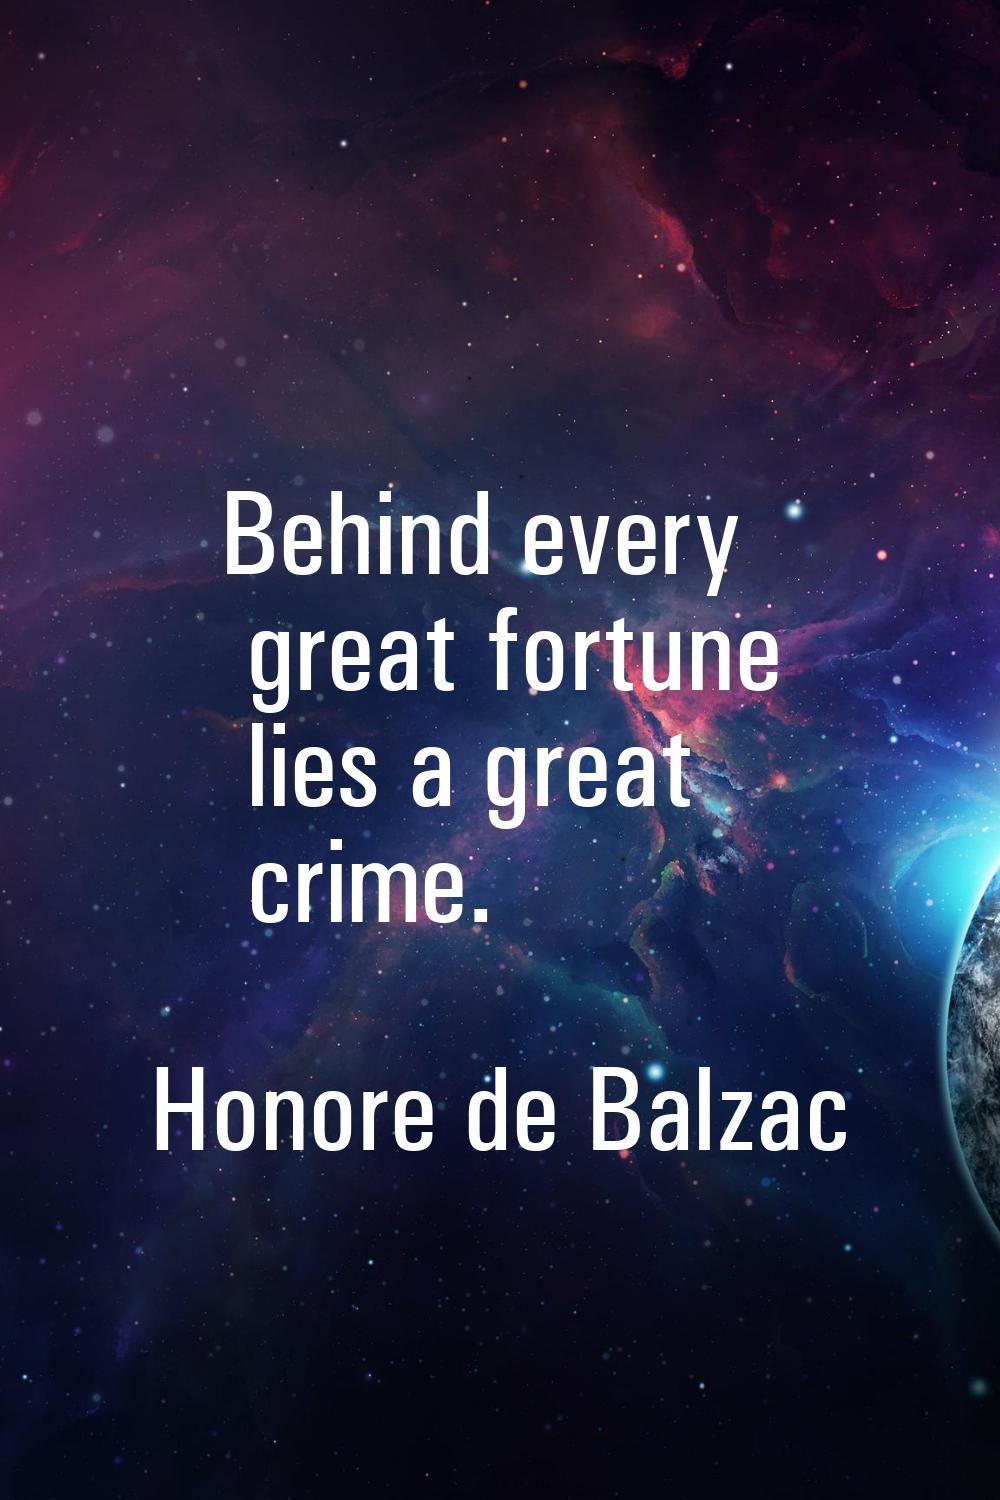 Behind every great fortune lies a great crime.